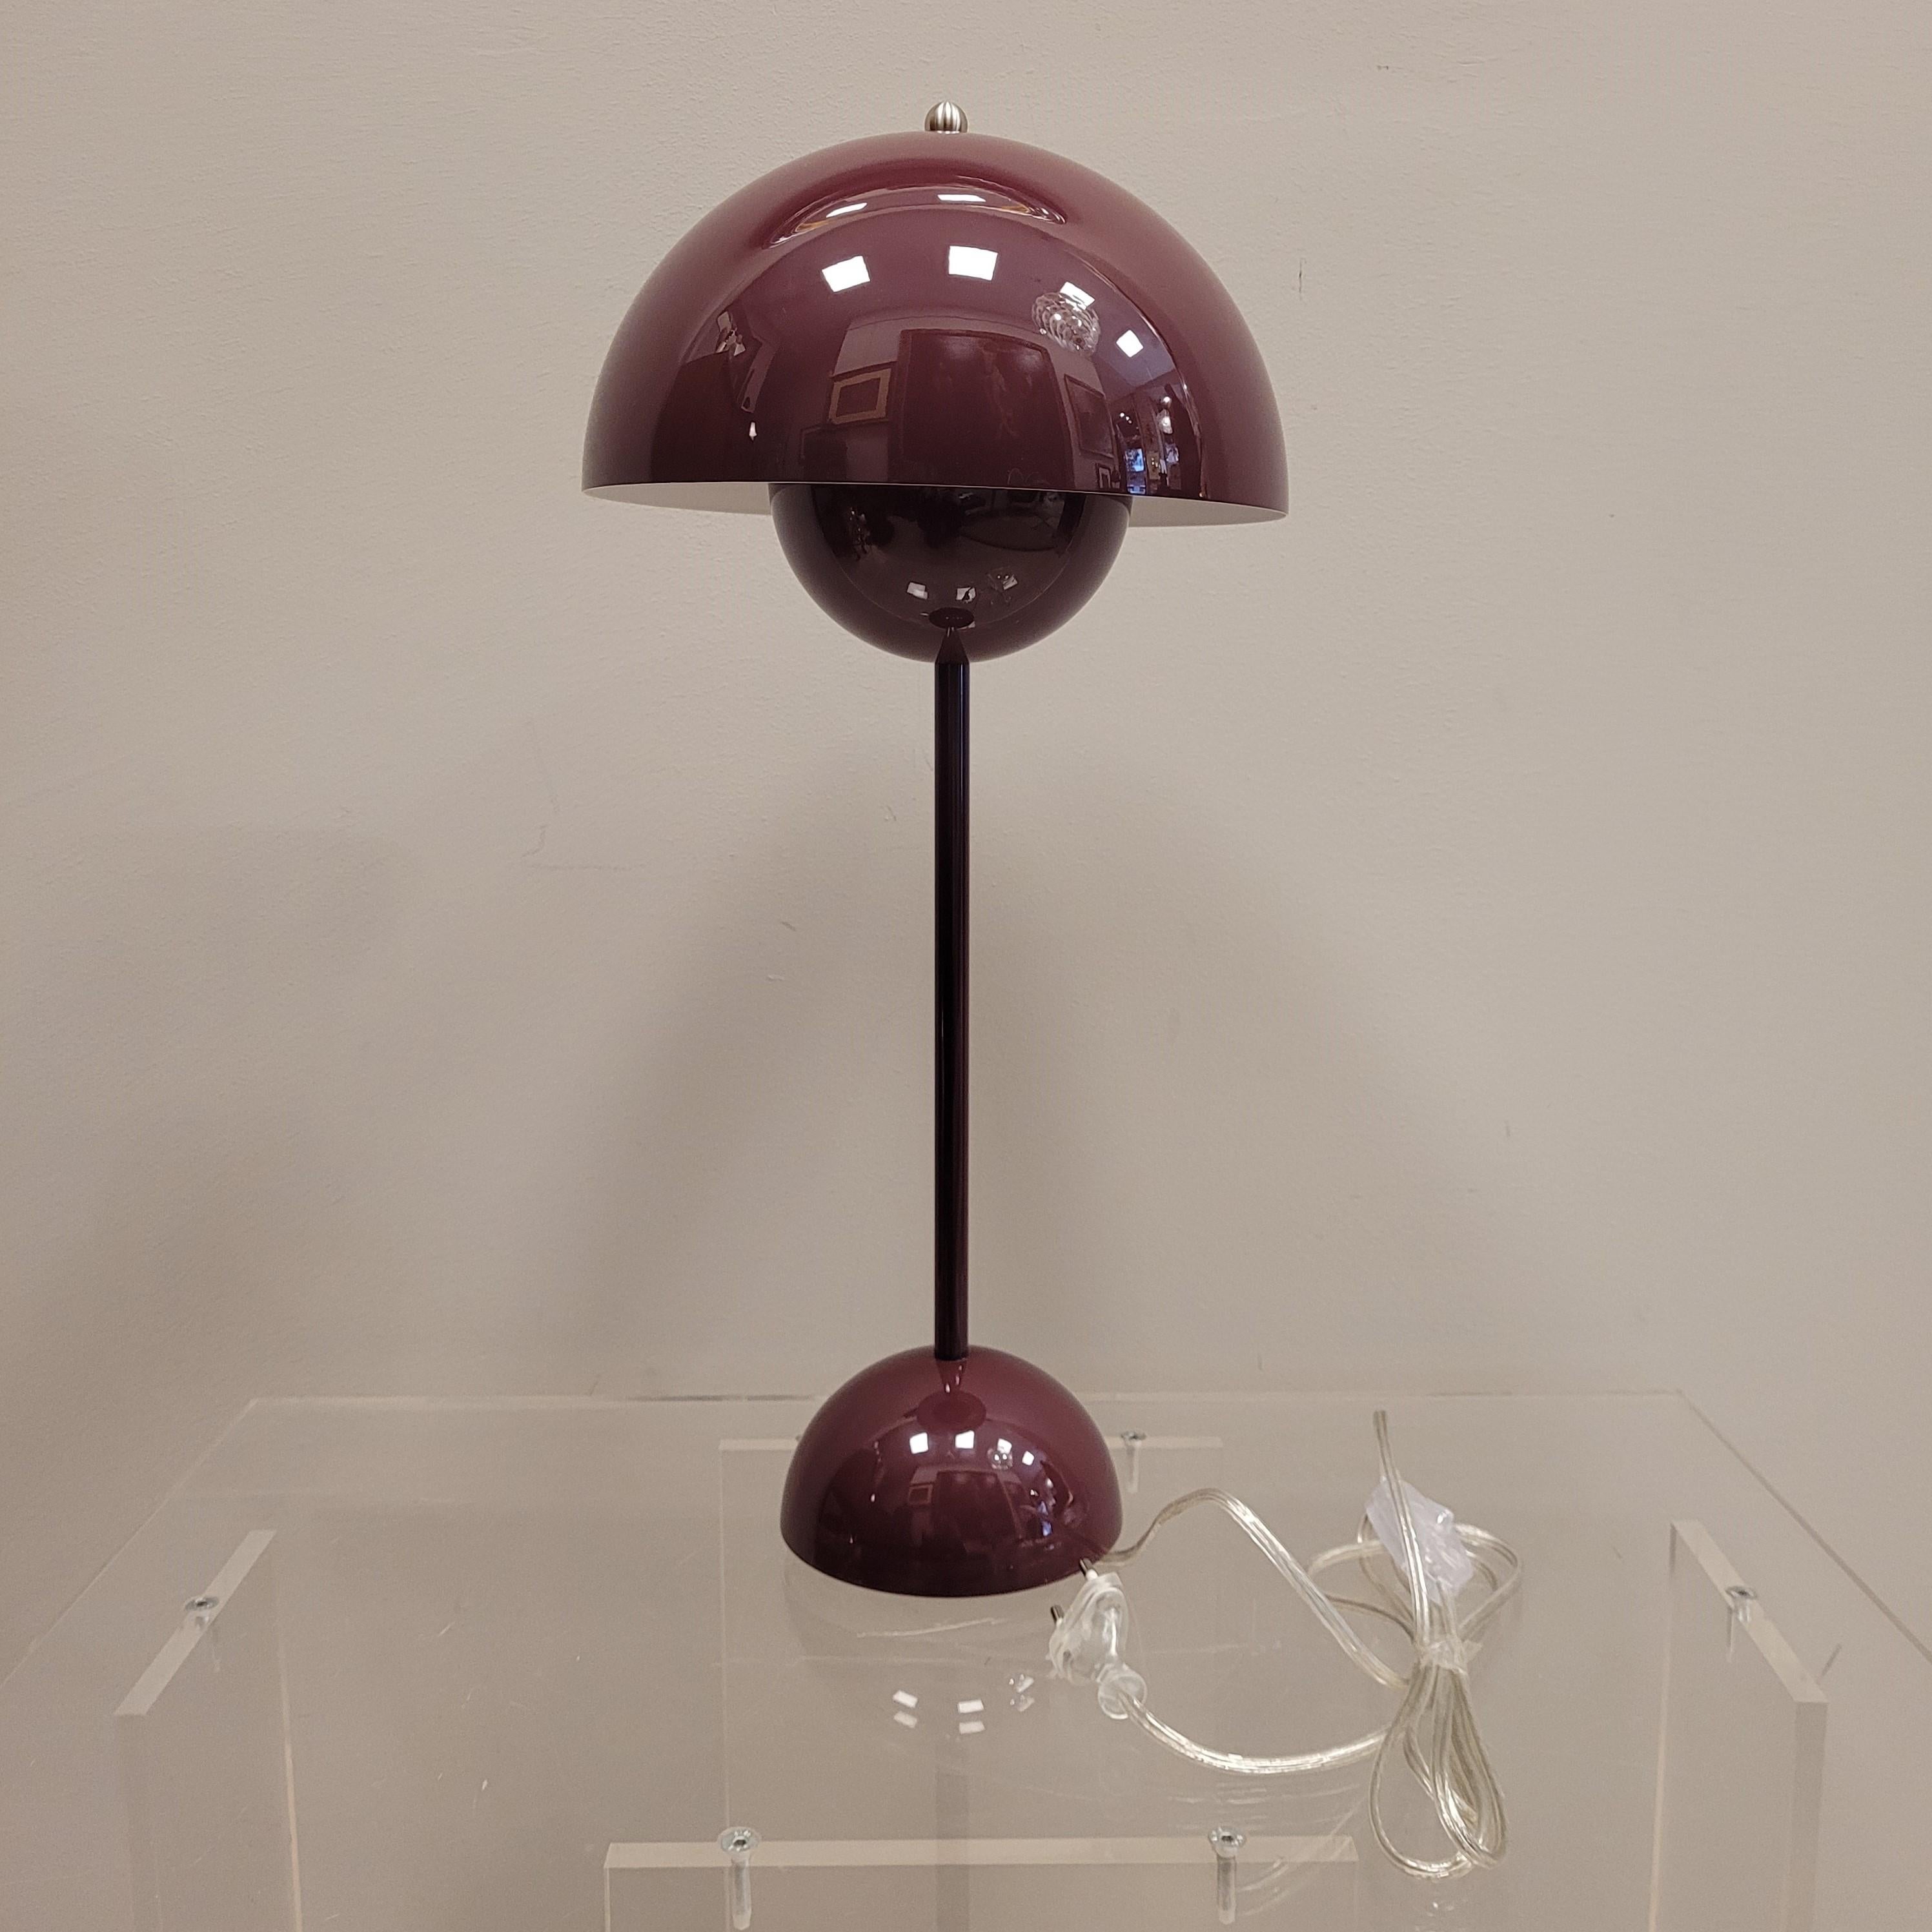 Beautiful lamp Design Verner Panton for &Tradition, 1968 in a single Burgundy color. 90s edition
Concept: Verner Panton Flowerpot is a completely classic exclusive retro lamp as it was designed in 1968. The lamp was initially used in the restaurant